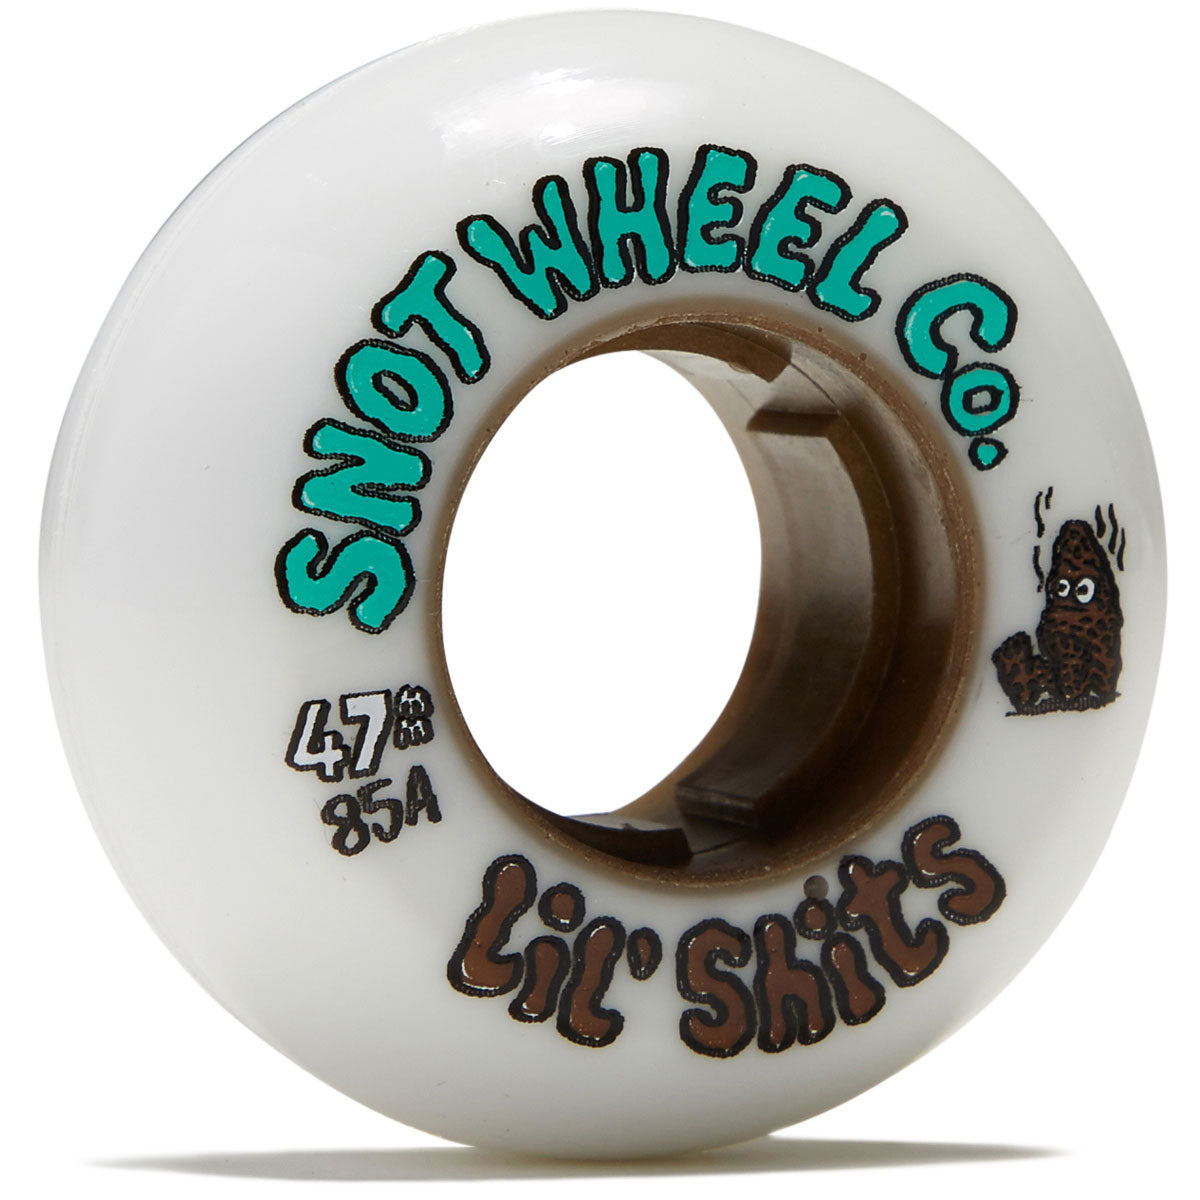 Snot Lil Shits 85a Skateboard Wheels - 47mm image 1